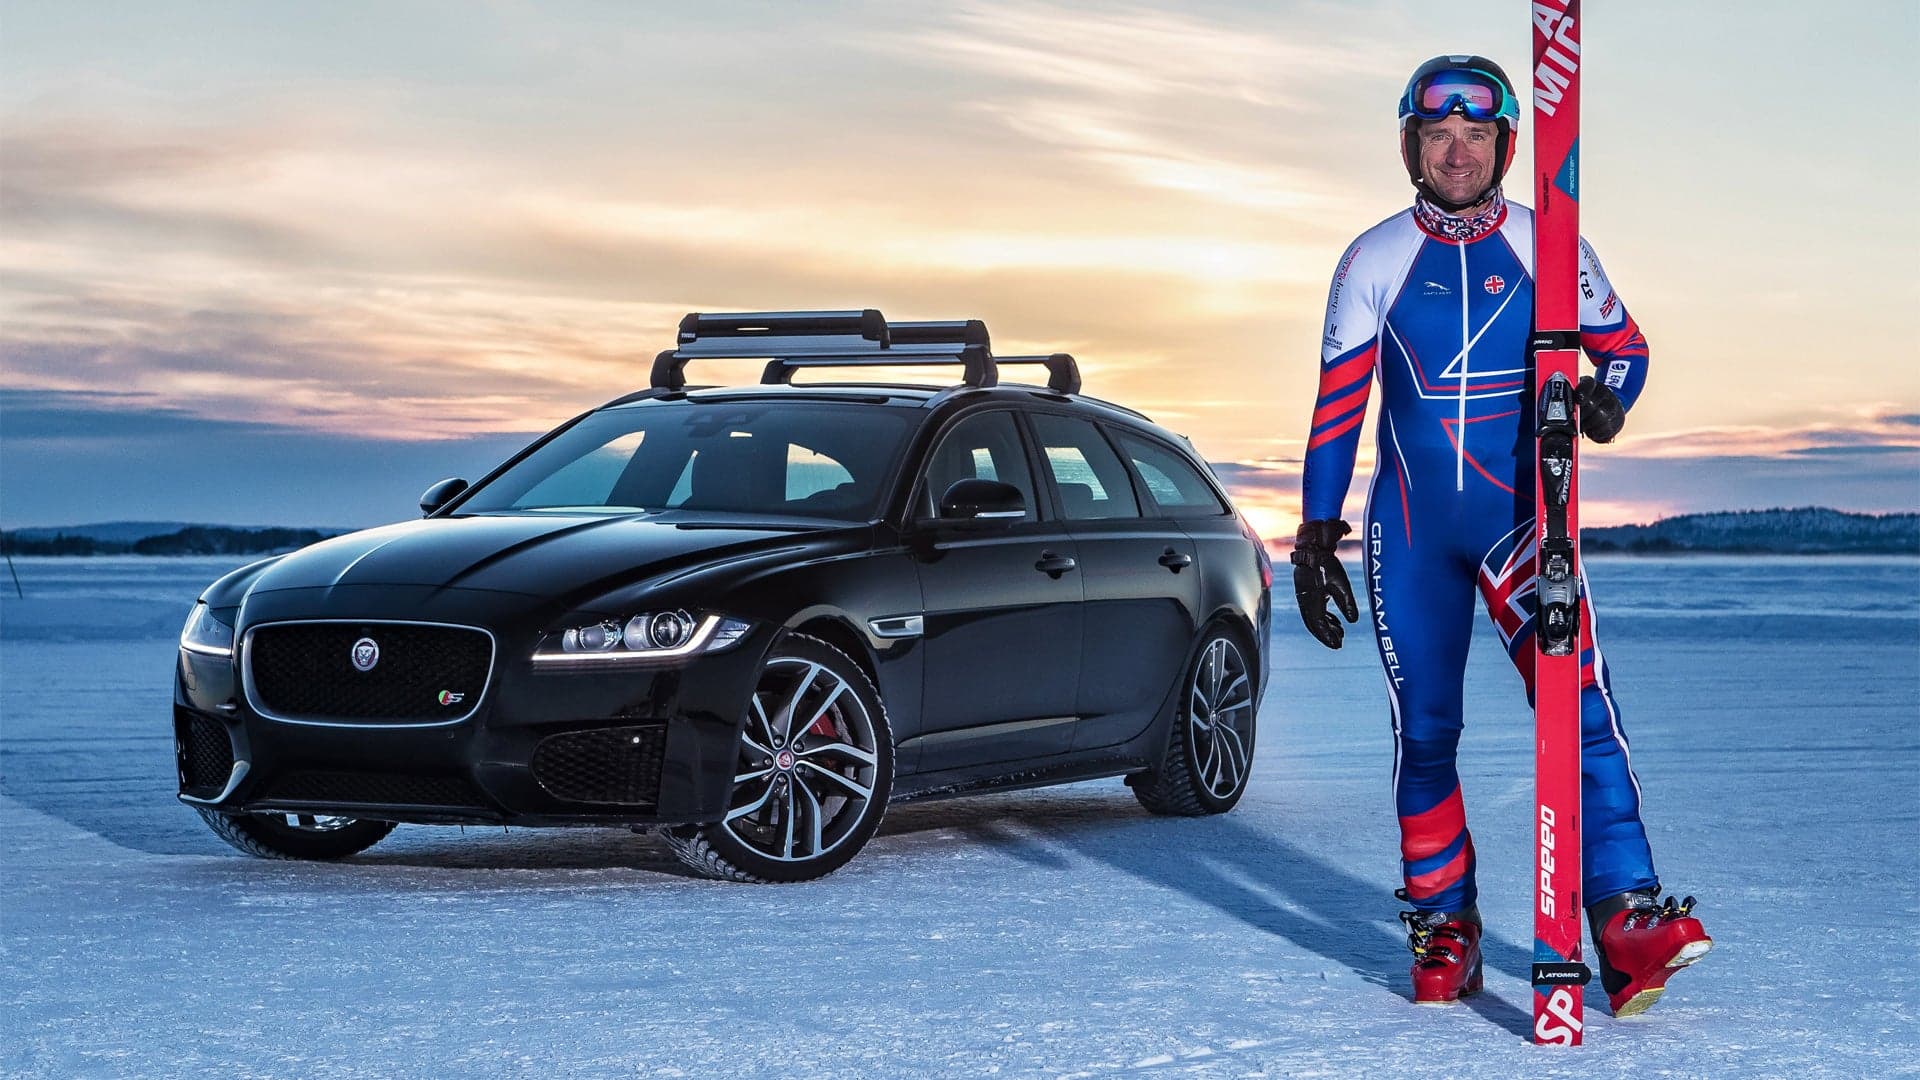 Jaguar Breaks Guinness World Record by Towing Olympic Skier at 117 MPH Behind XF Sportbrake